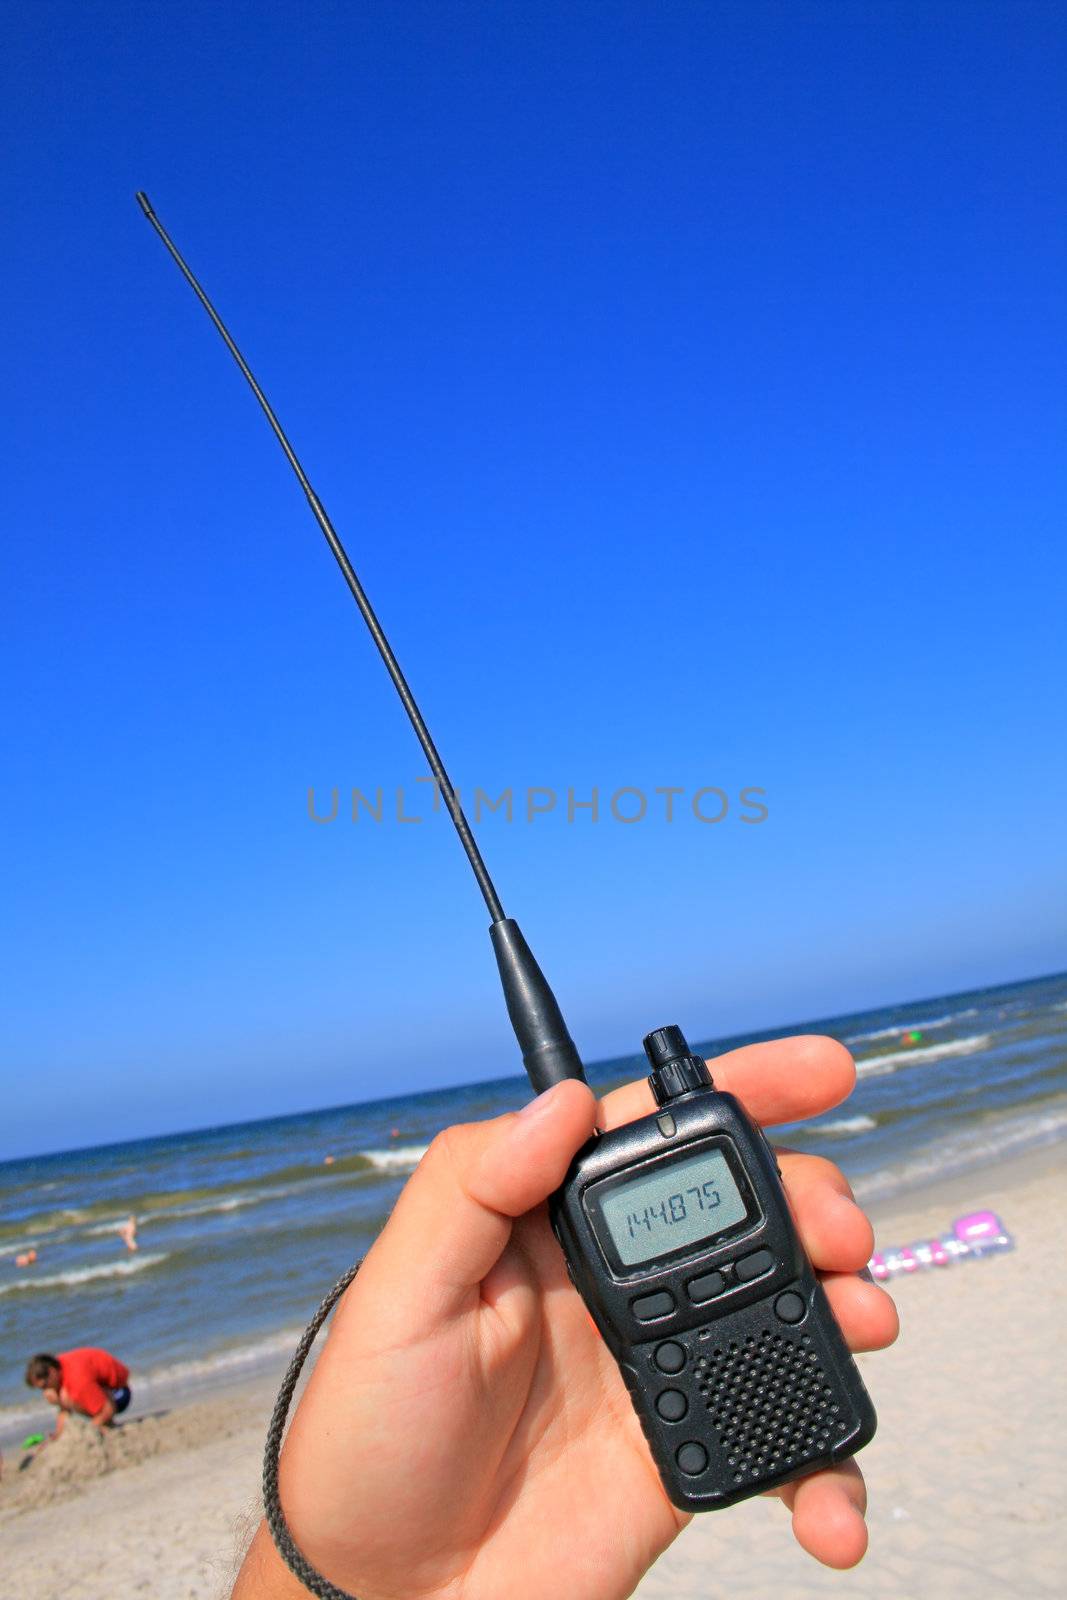 VHF transceiver in a hand against the beach and blue sky
